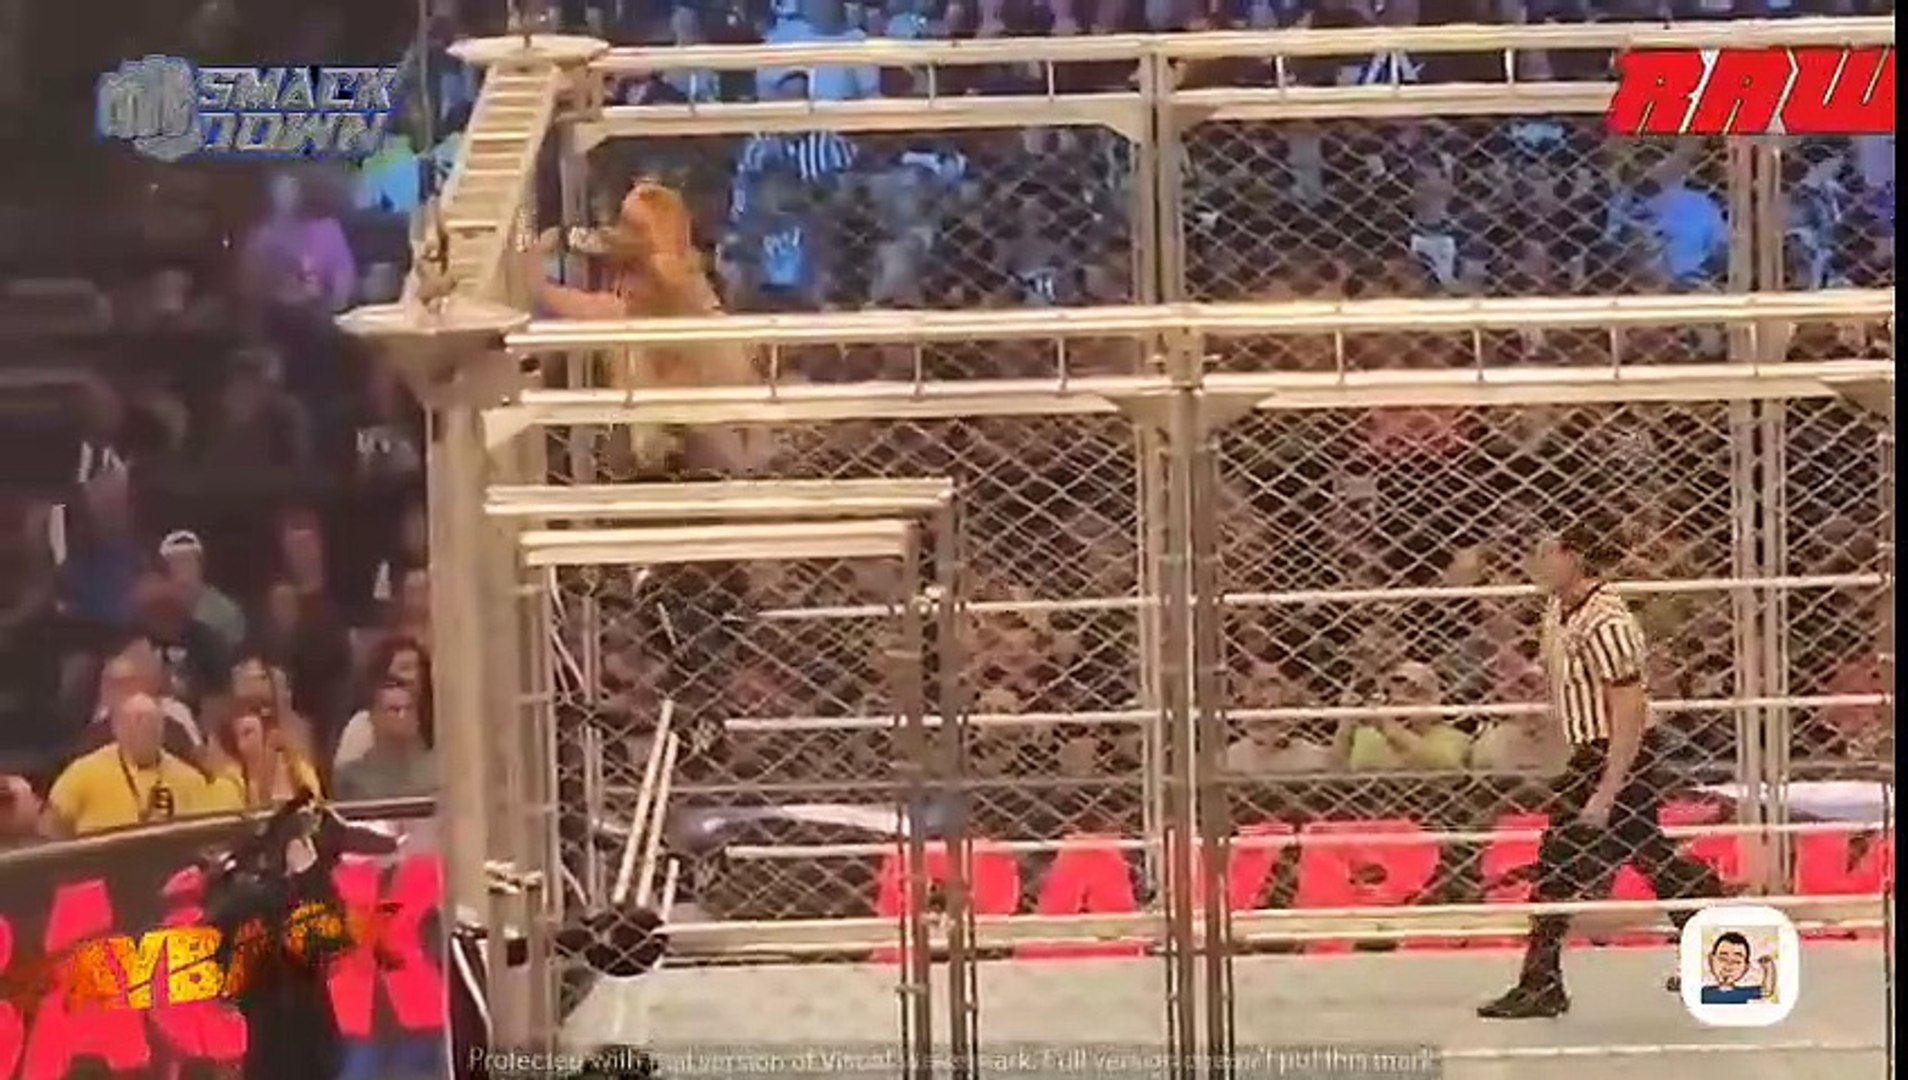 Becky Lynch Vs Trish Stratus Set In Steel Cage Match After Double Count-Out  On 8/14 WWE Raw - Sacnilk